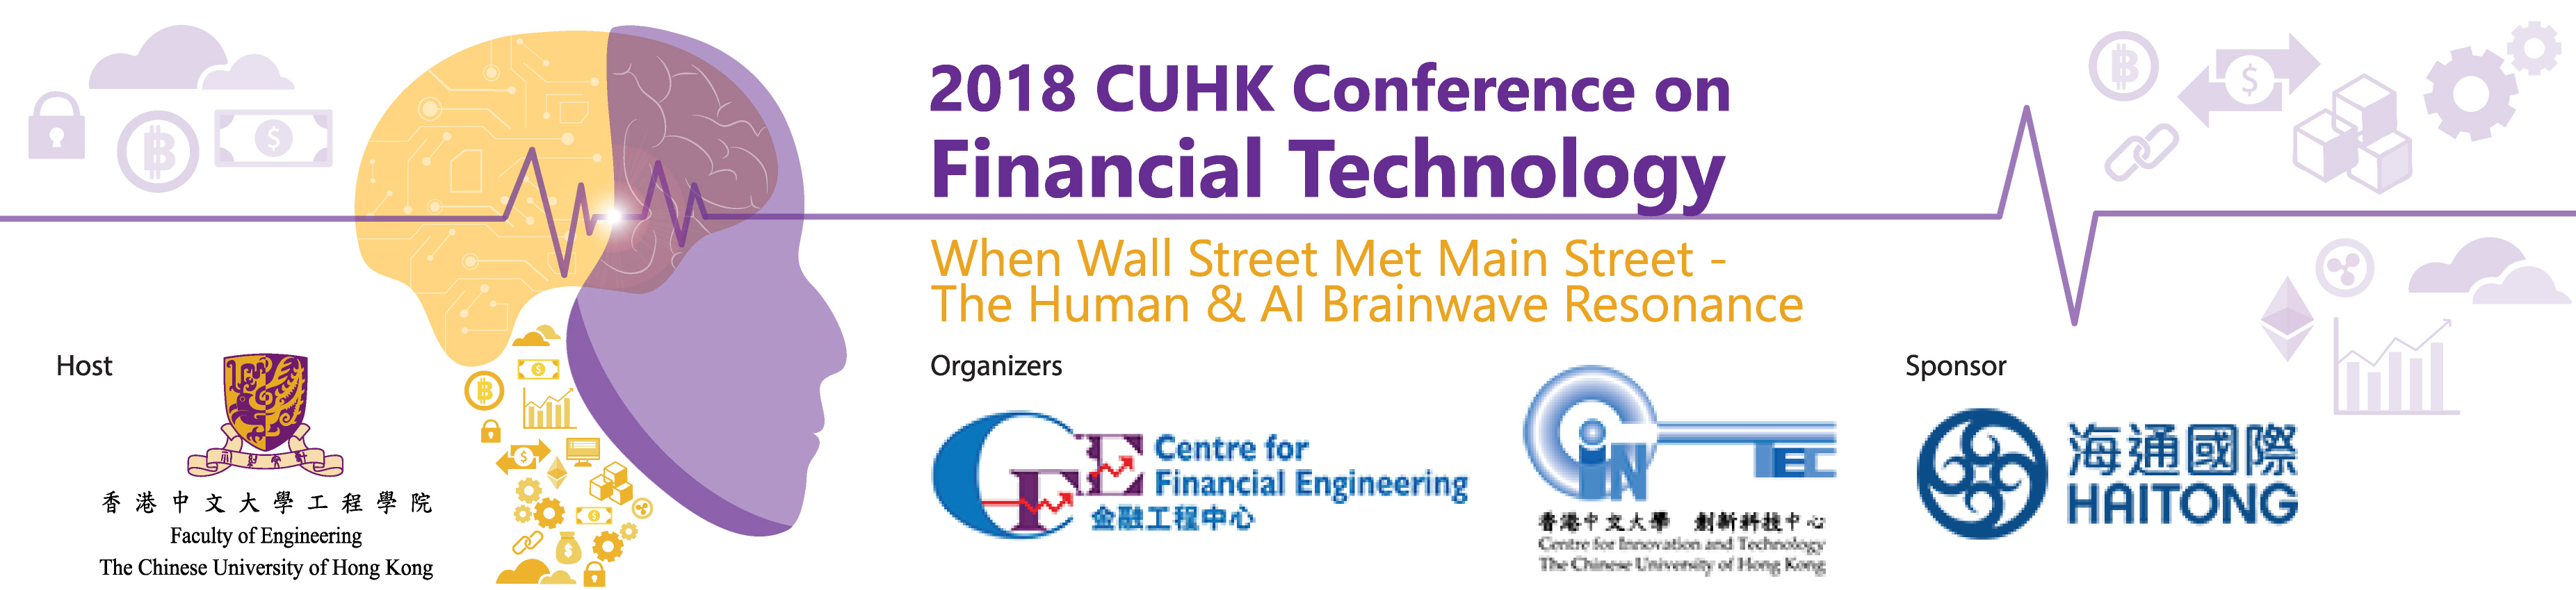 Conference on Financial Technology